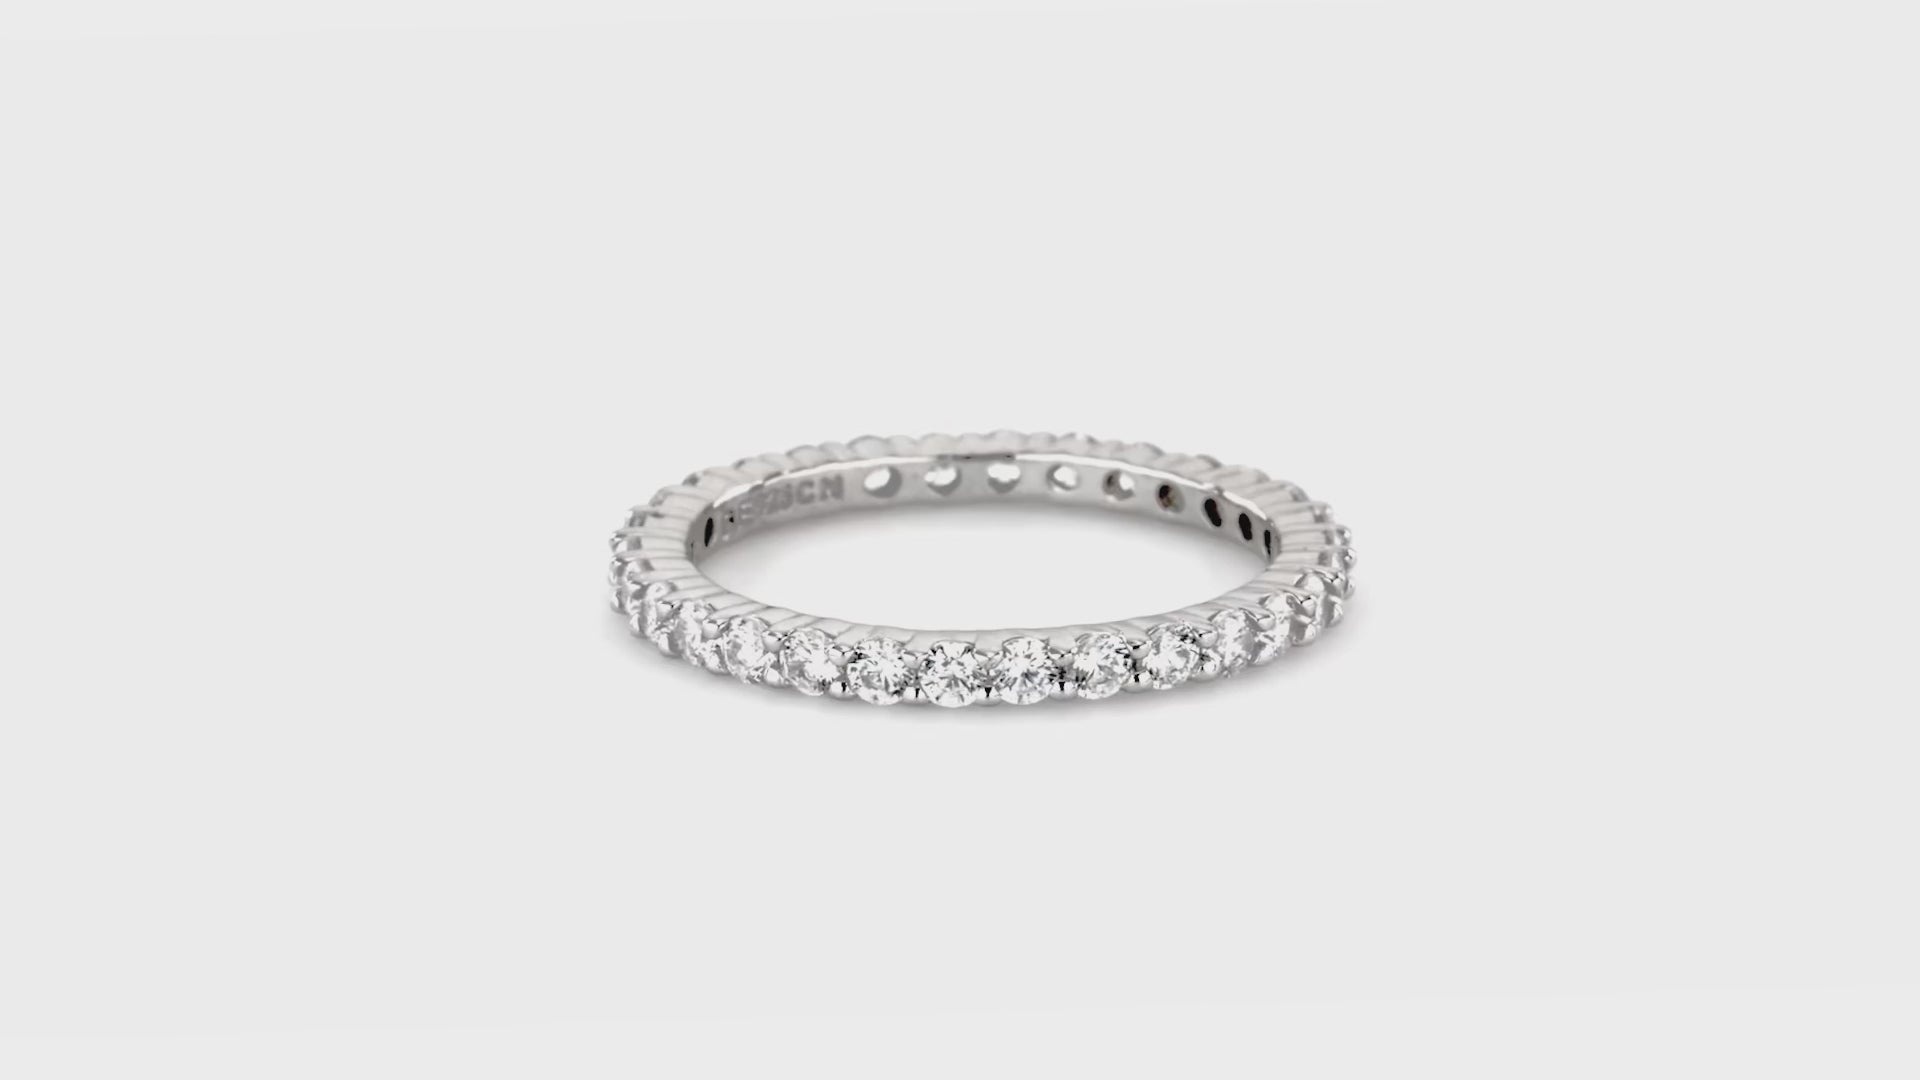 Video Contains CZ Stackable Ring Set in Sterling Silver. Style Number VR634-02